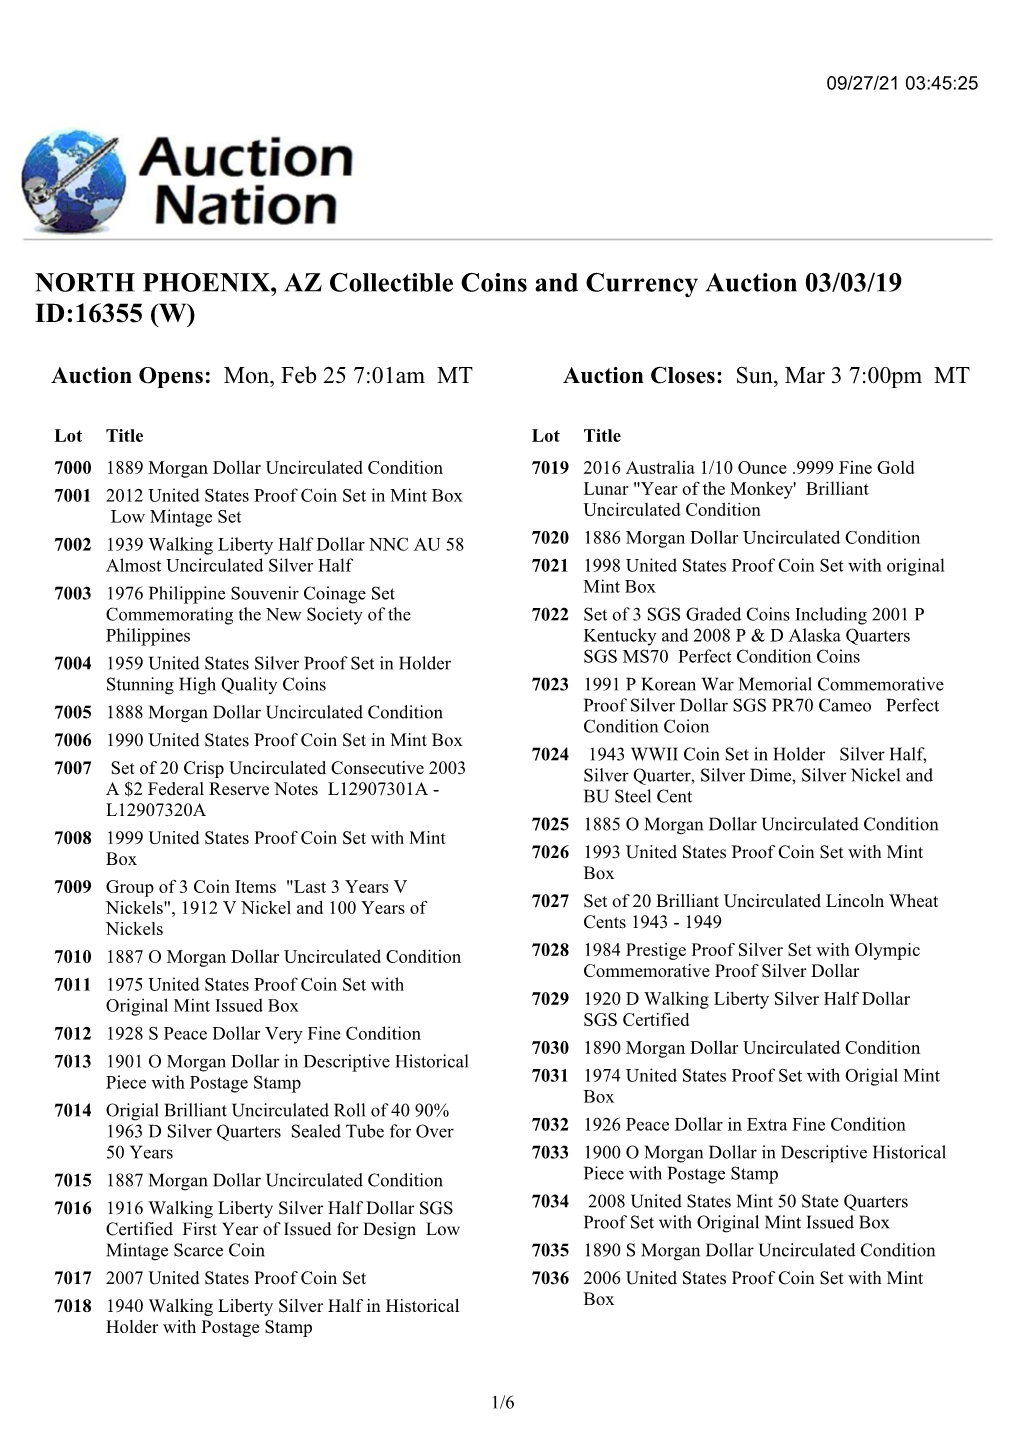 NORTH PHOENIX, AZ Collectible Coins and Currency Auction 03/03/19 ID:16355 (W)